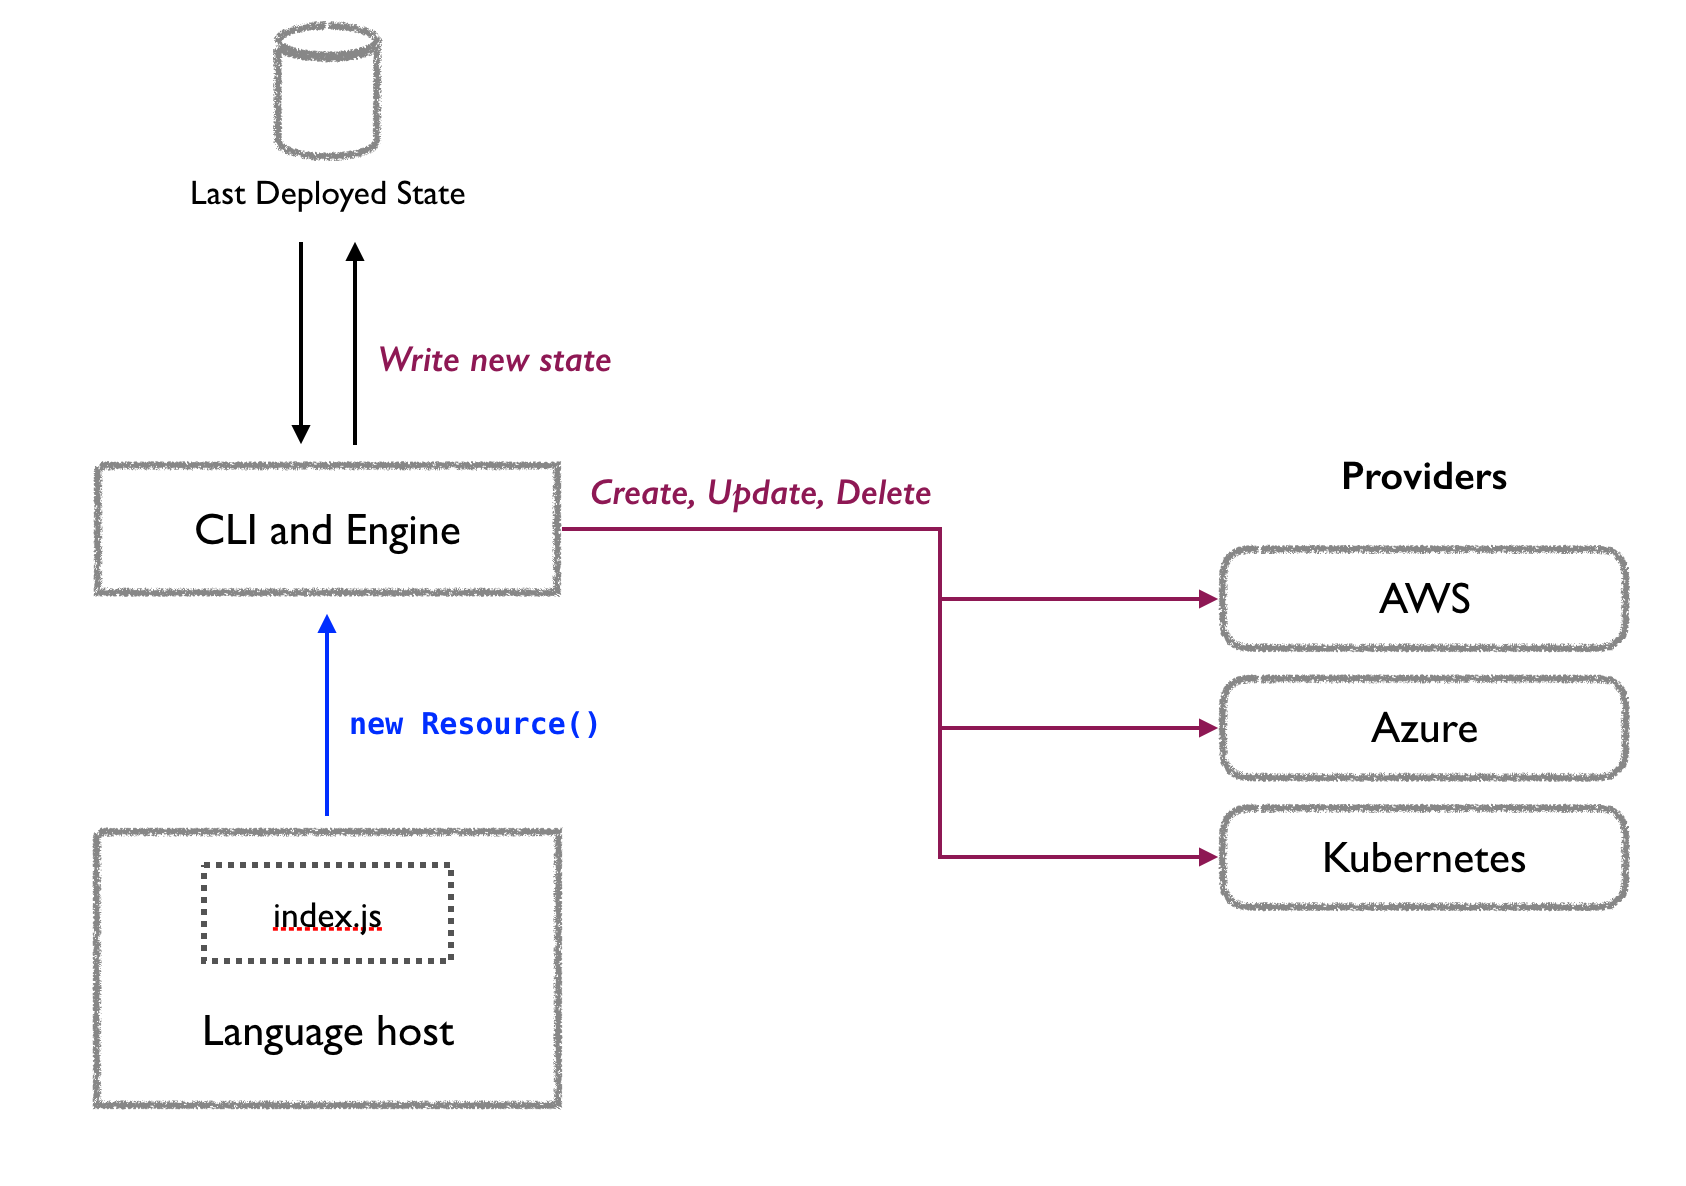 Pulumi IaC system architecture, the Pulumi engine and providers